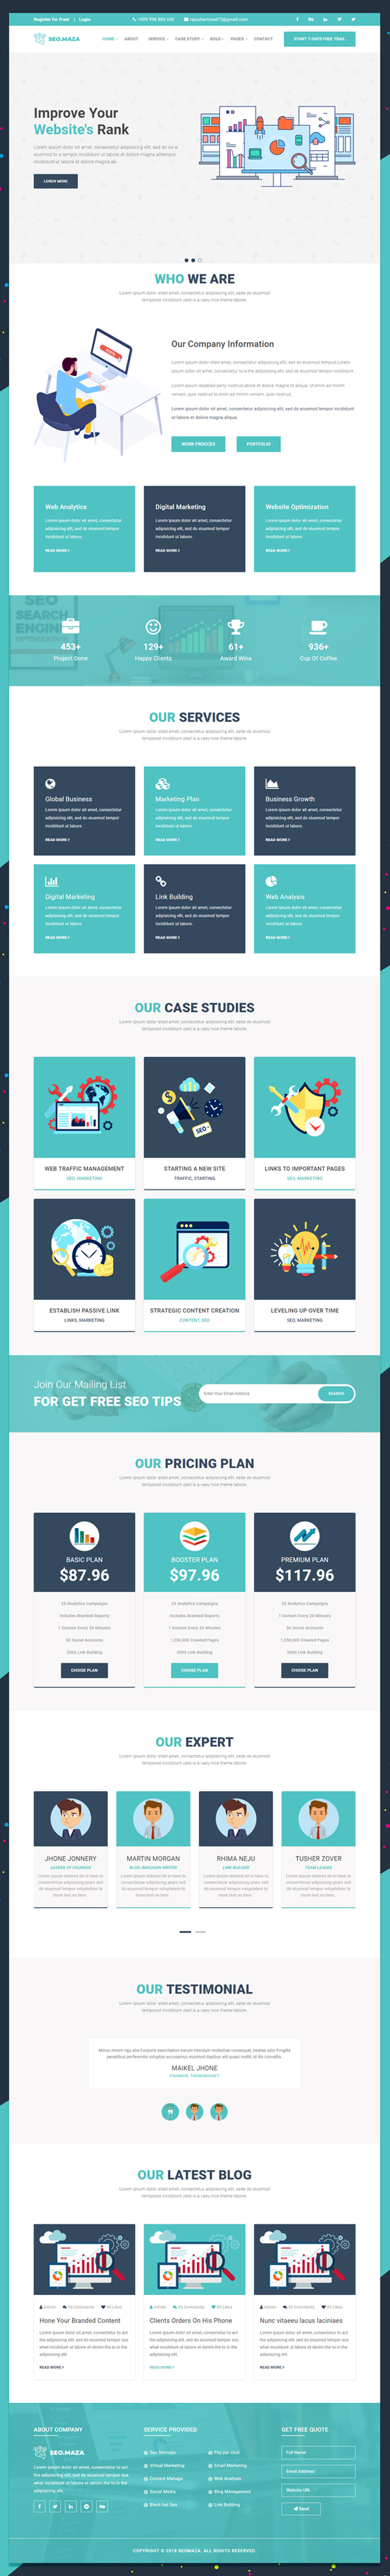 Free PSD Seo Responsive Bootstrap Website Template